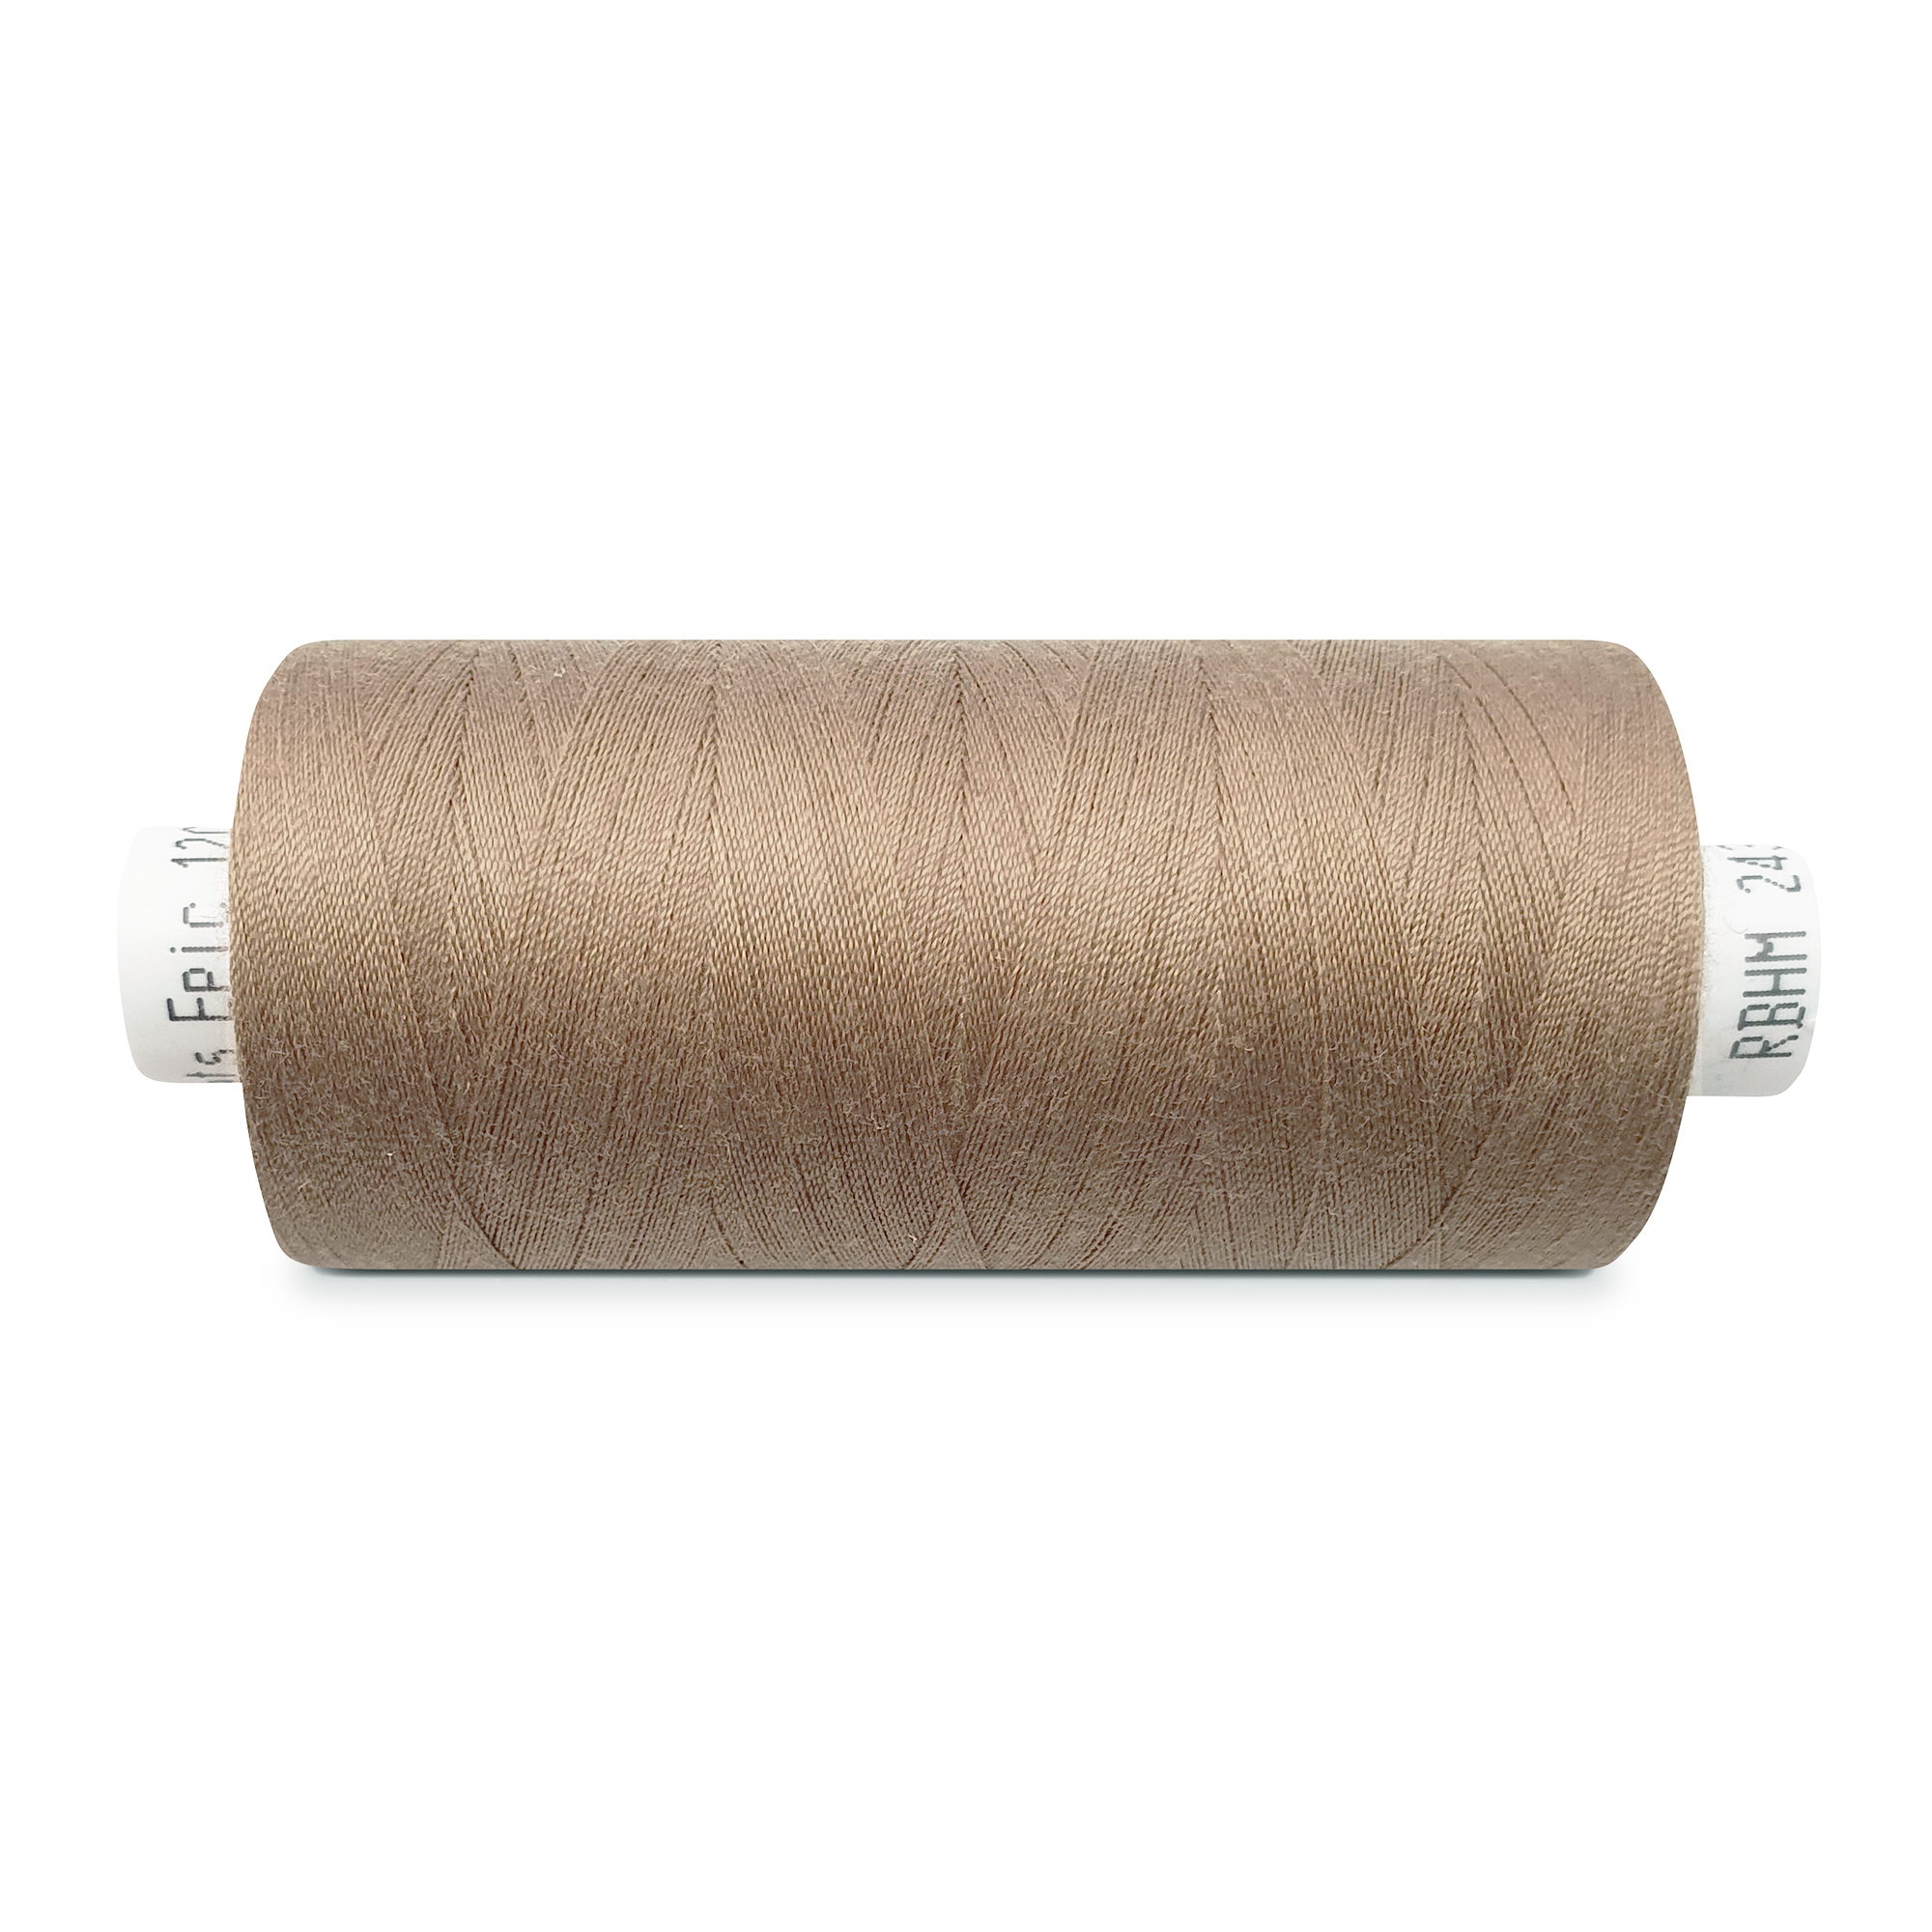 Leather/Sewing thread light brown